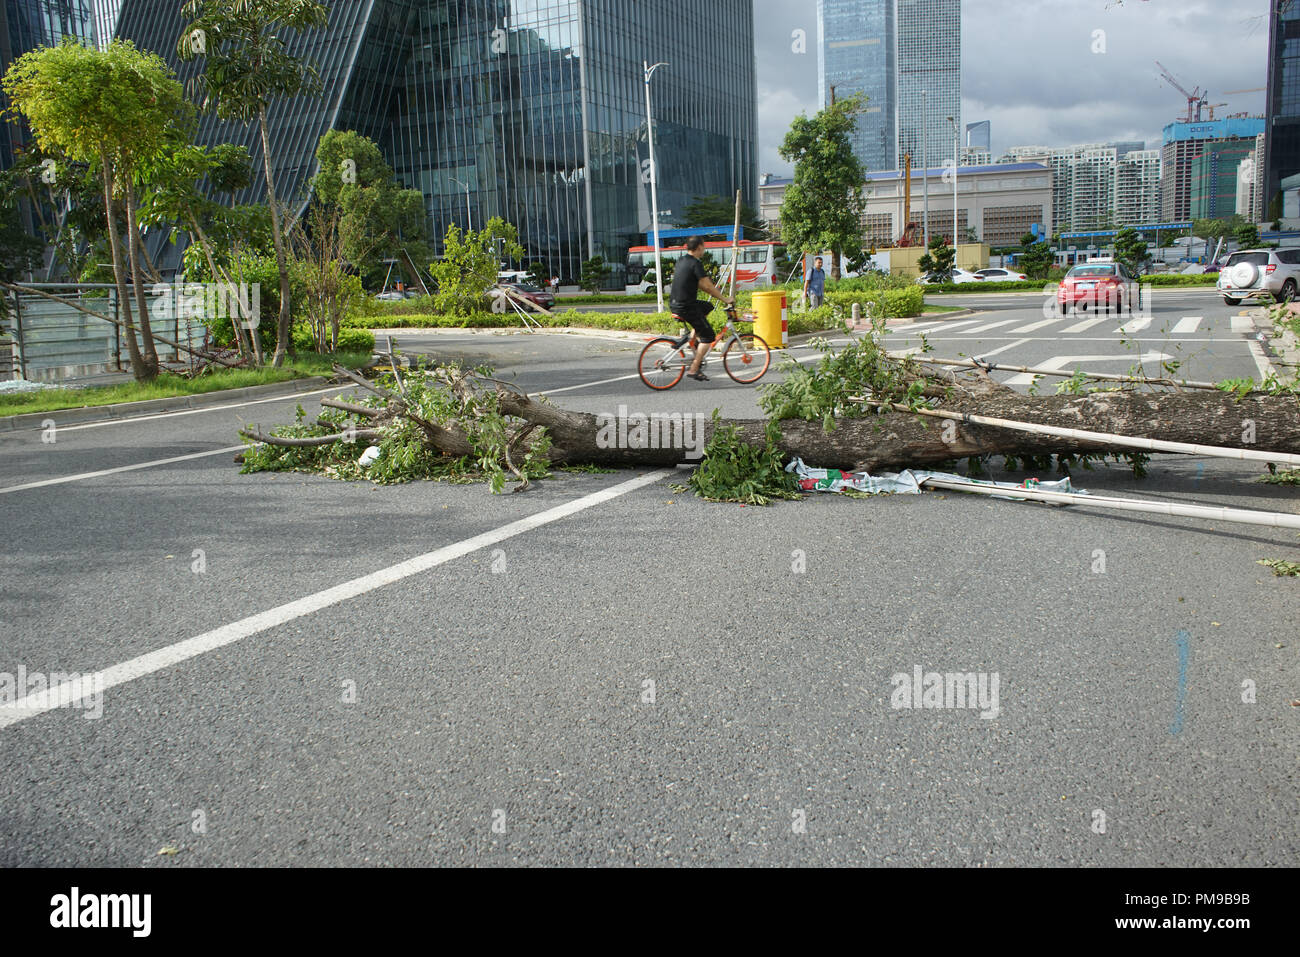 Fallen tree blocking road, Typhoon Mangkhut aftermath in Shenzhen, Guangdong Province in Southern China. Stock Photo